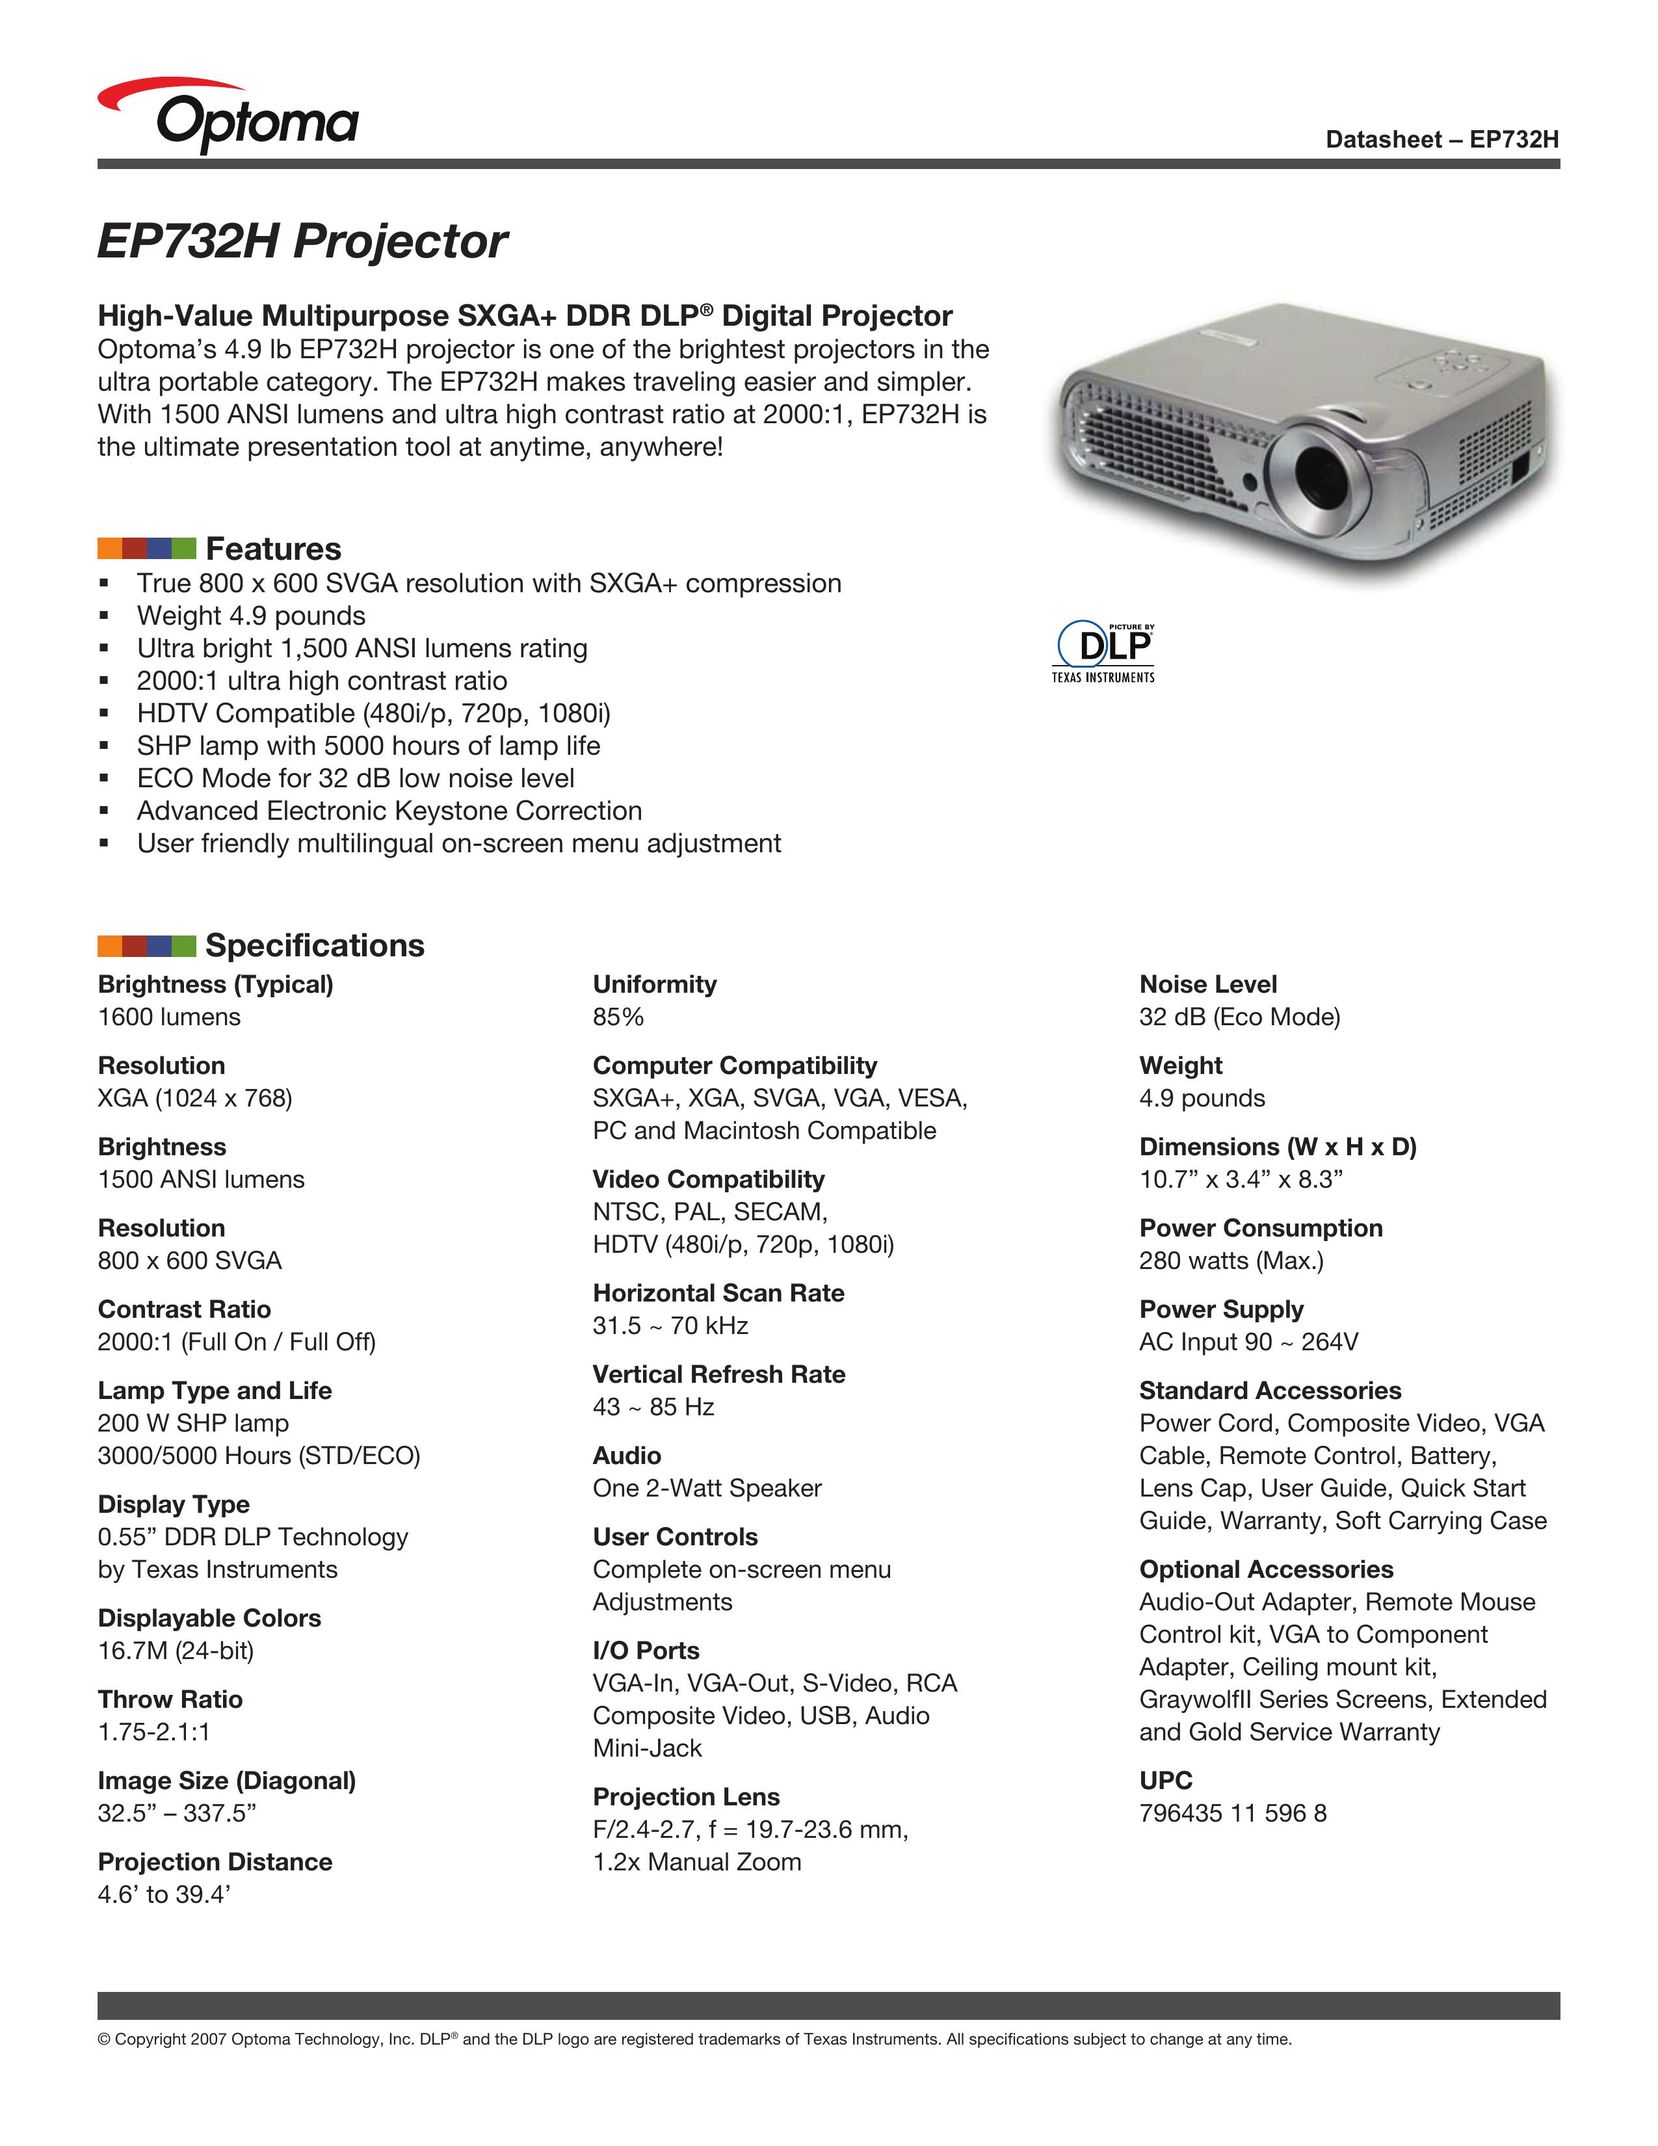 Optoma Technology EP732H Projector User Manual